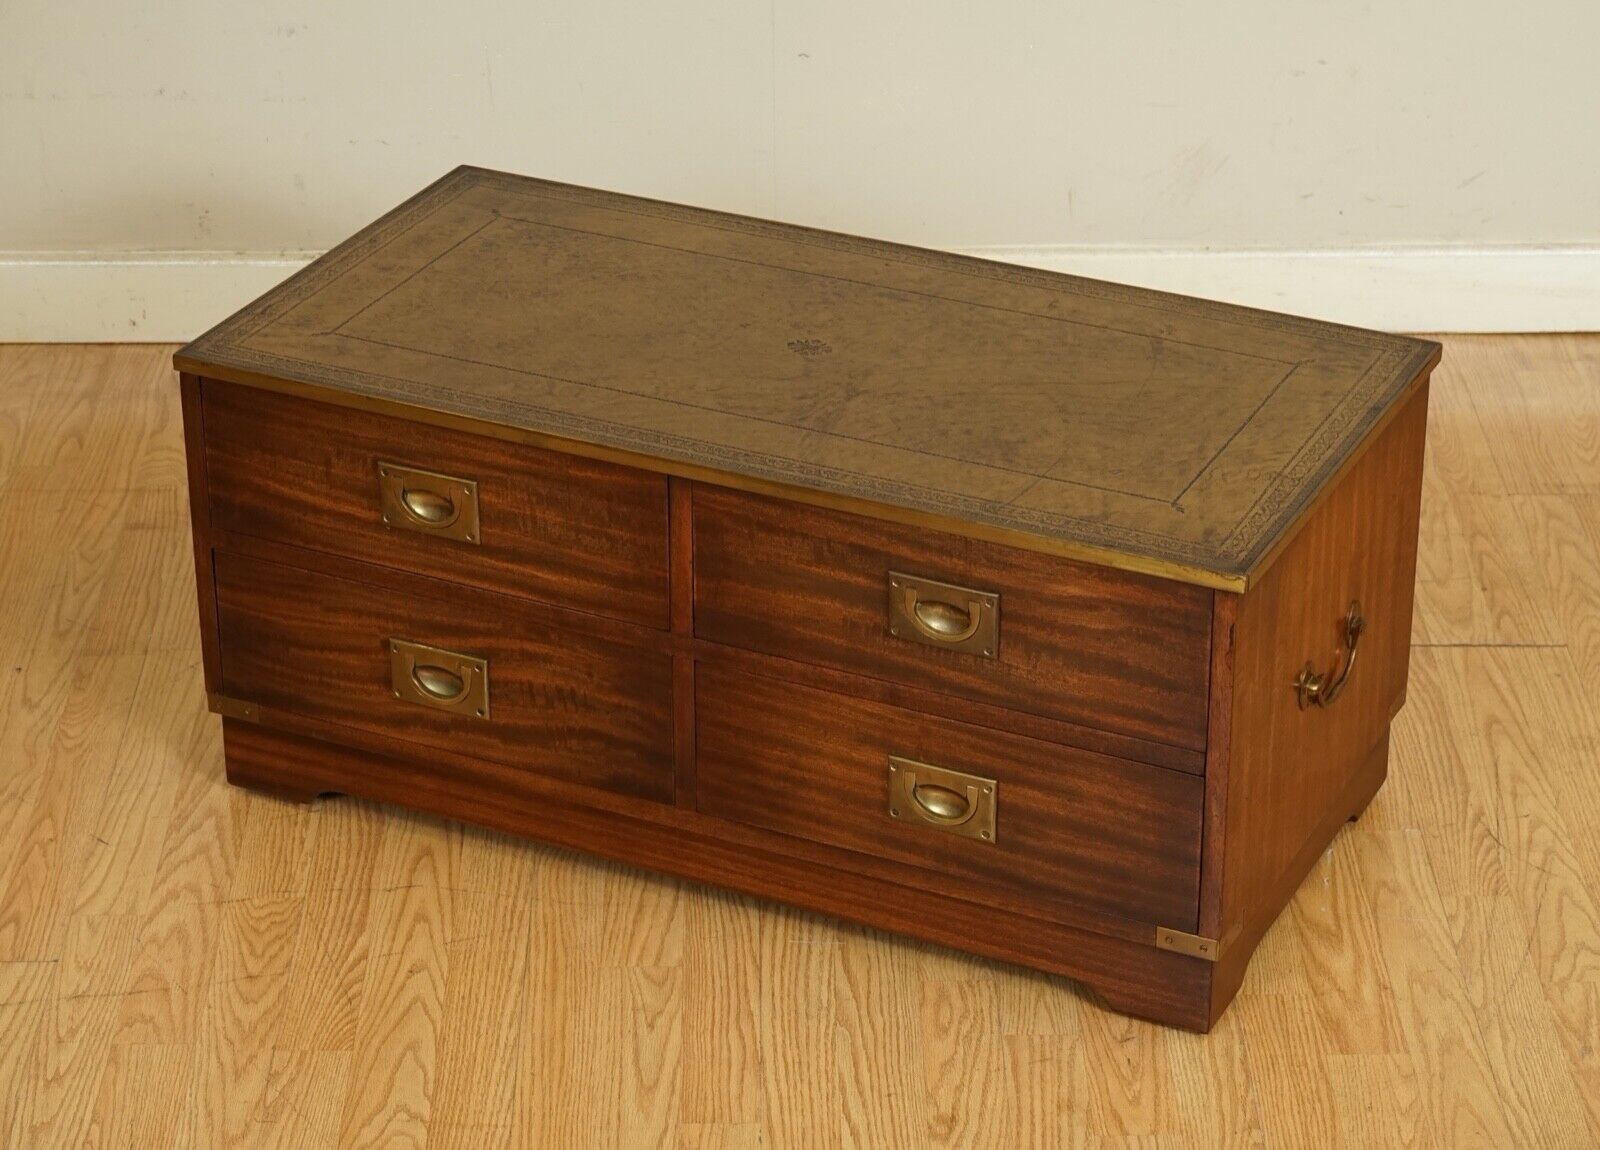 STUNNING BEVAN AND FUNNEL MILITARY CAMPAIGN CHEST TV STAND WITH BROWN LEATHER